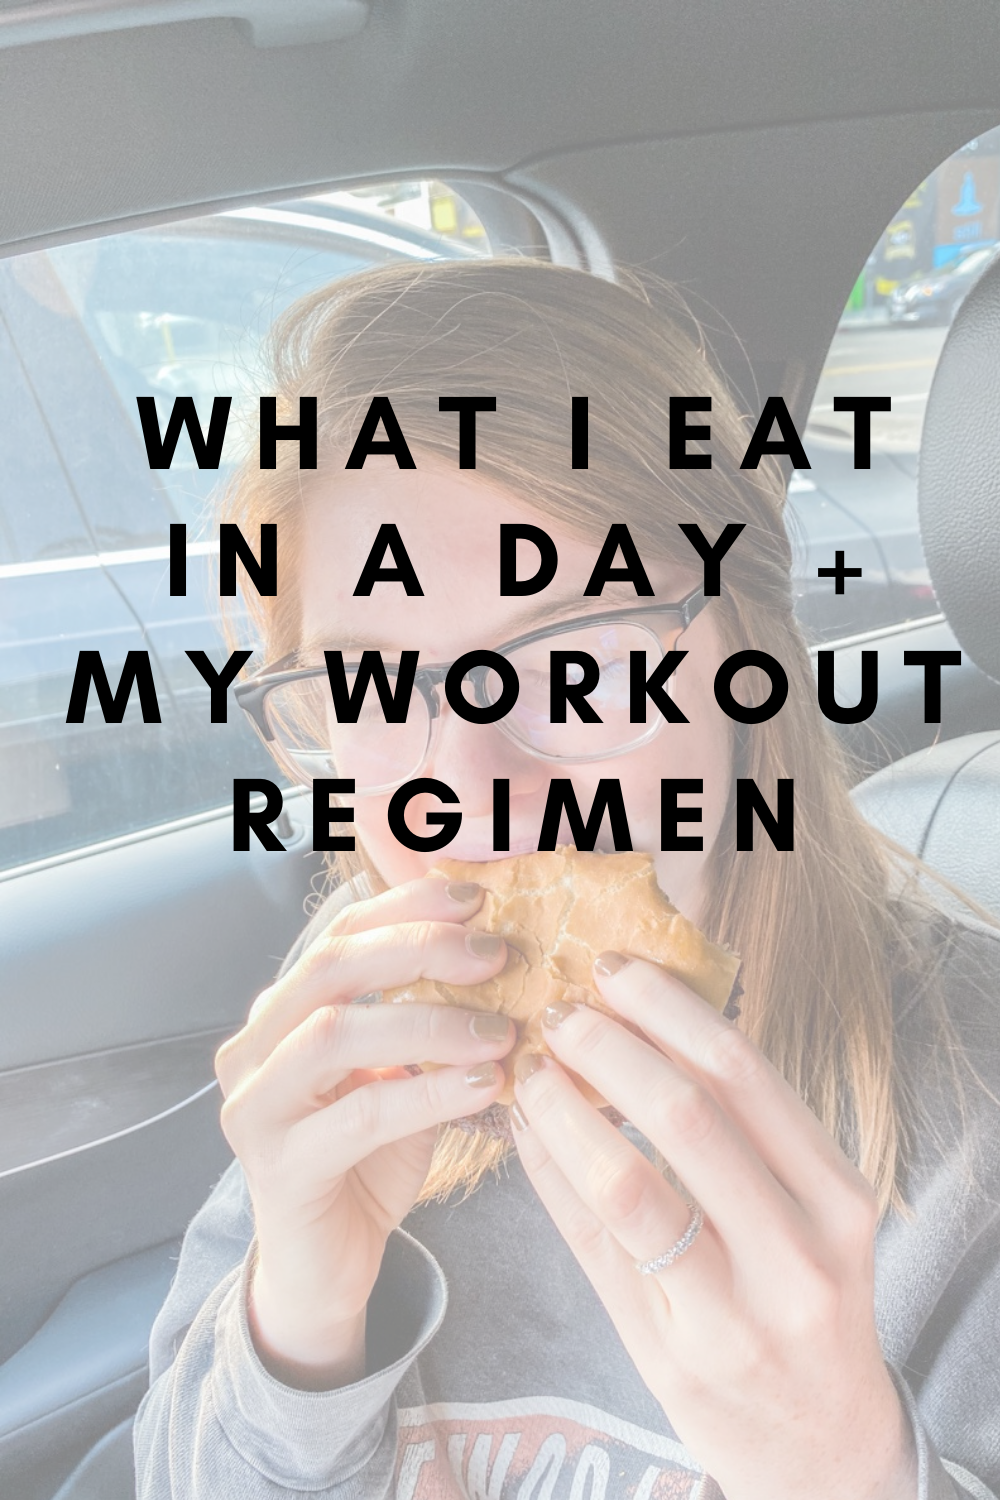 the  answers to what i eat in a day plus my current workout regimen, lments of style, la blogger, ulcerative colitis, burgers never say die, why "what i eat in a day" is BS